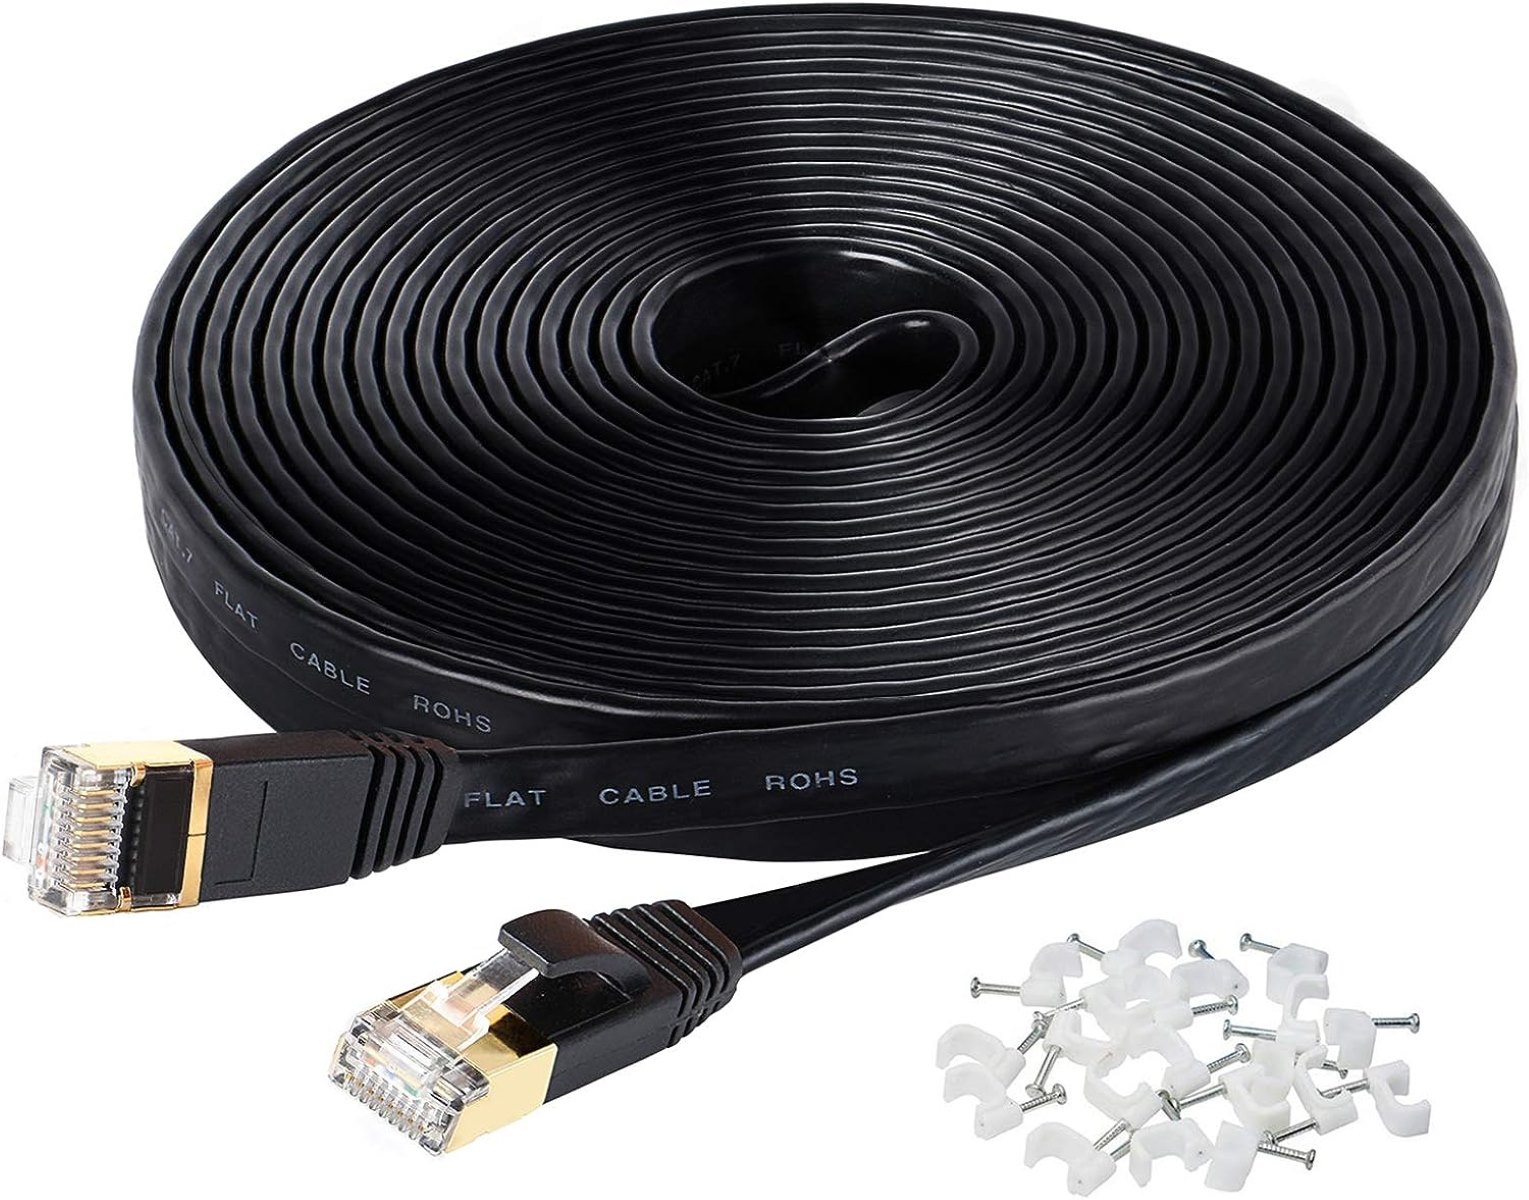 where-can-i-buy-a-50-ft-ethernet-cable